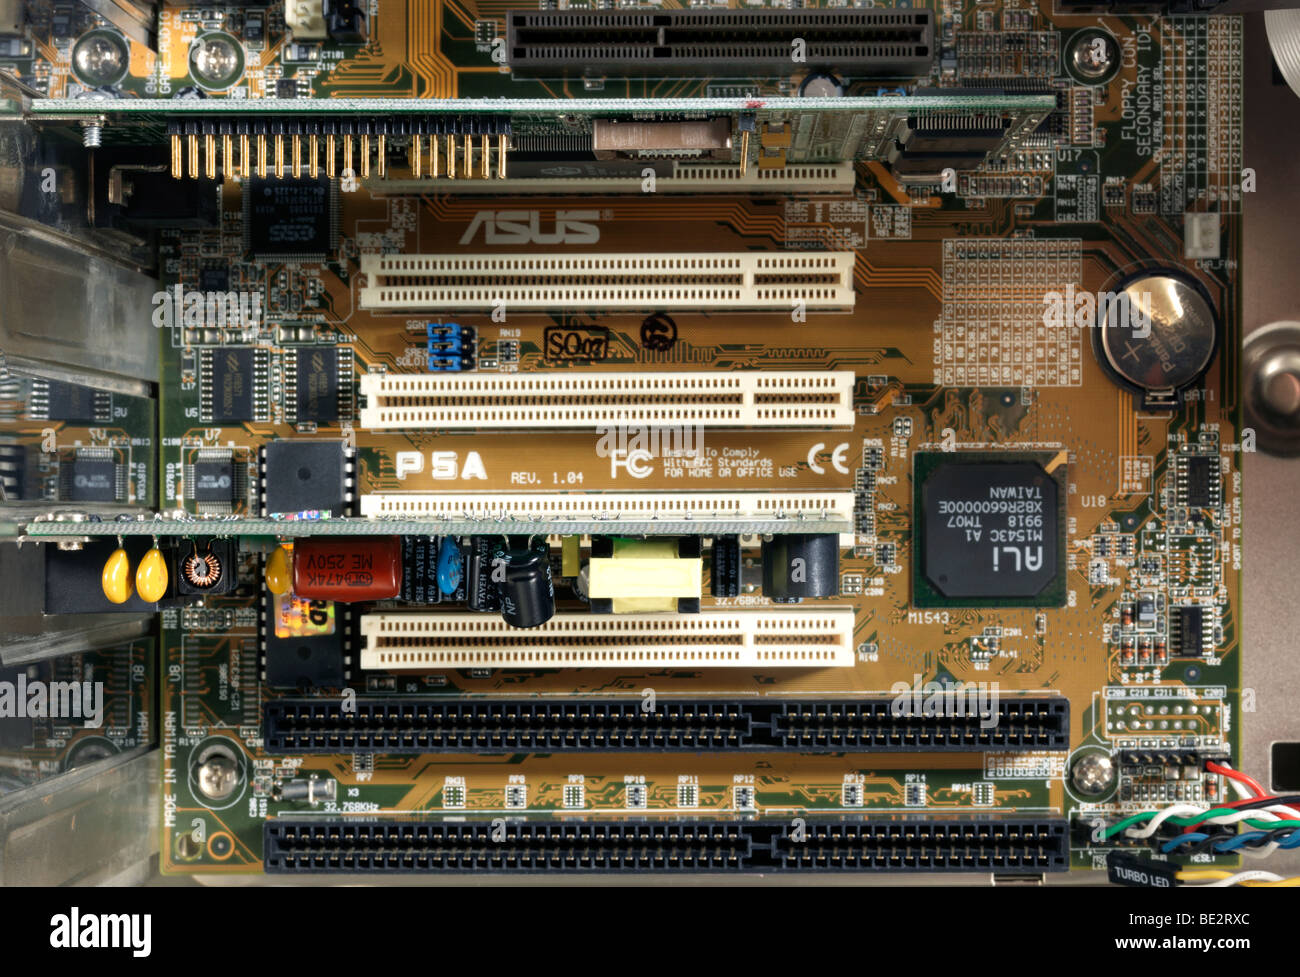 AGP and PCI slots on a motherboard of PC Inside Computer With AGP slot in use Stock Photo